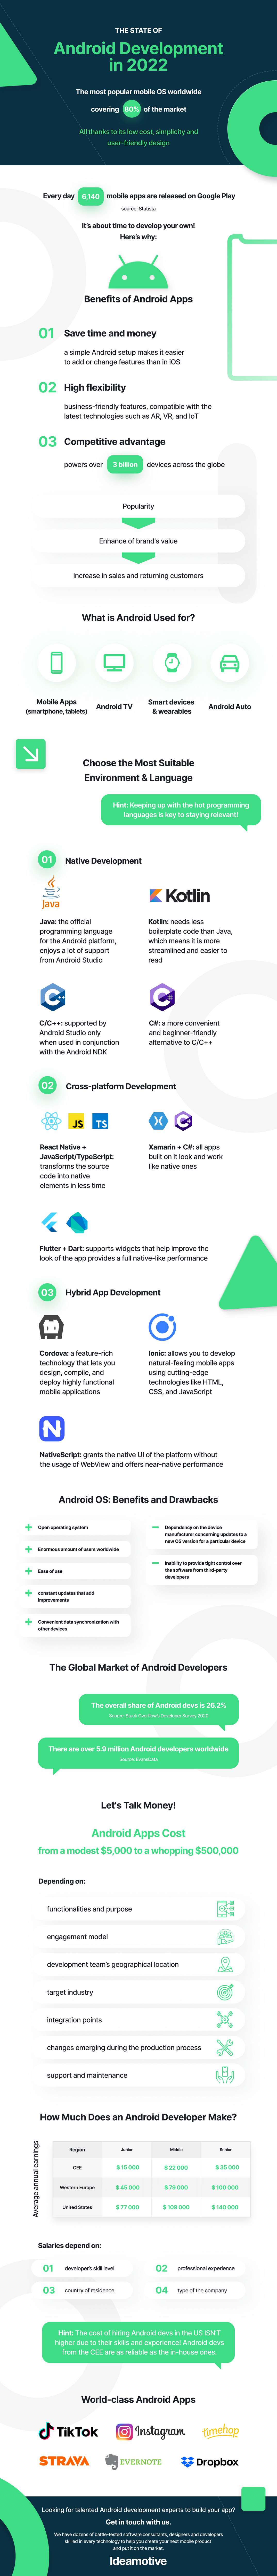 Android pillar infographic 2022